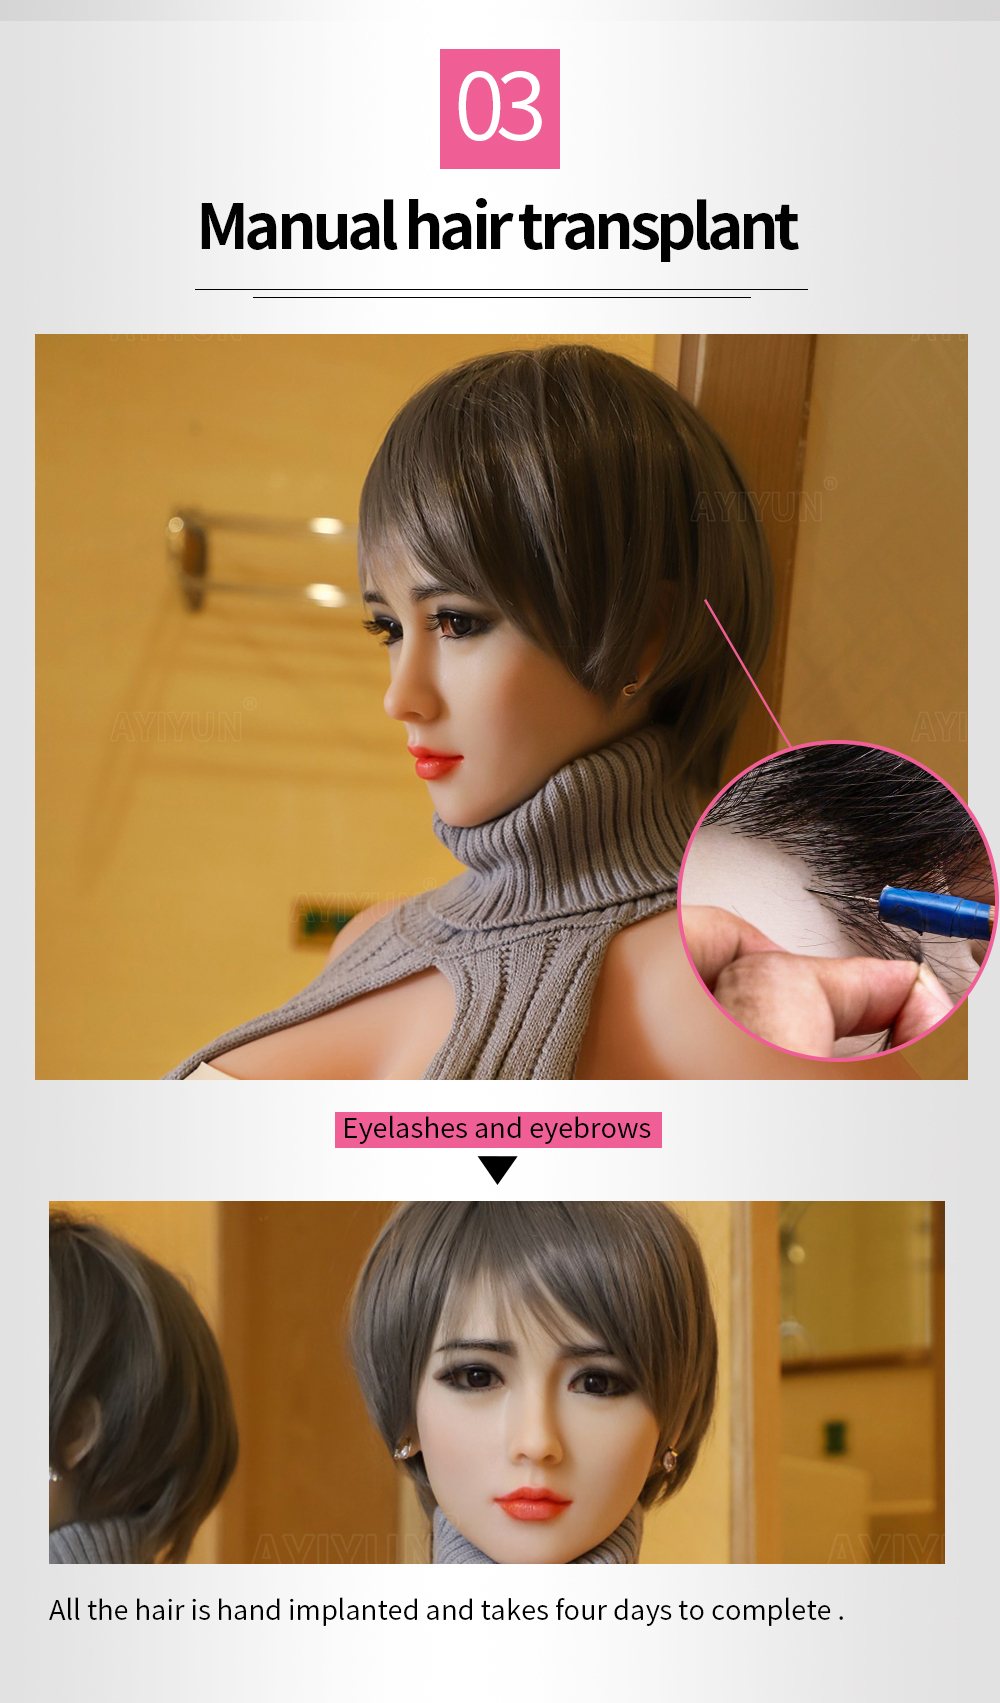 Real Silicone Sex Dolls for Men Realistic Big BreastOral Anal Vagina Full Sex Sexy Love Doll Adult Toys Masturbator Love Dolls,Masturbator,Love Dolls,Adult Dolls,Adult Love Dolls,Masturbator,Love Dolls,Adult Dolls,life-size sex dolls,cheap sex dolls,adult sex dolls,sex dolls,bratz doll,sex with sex doll